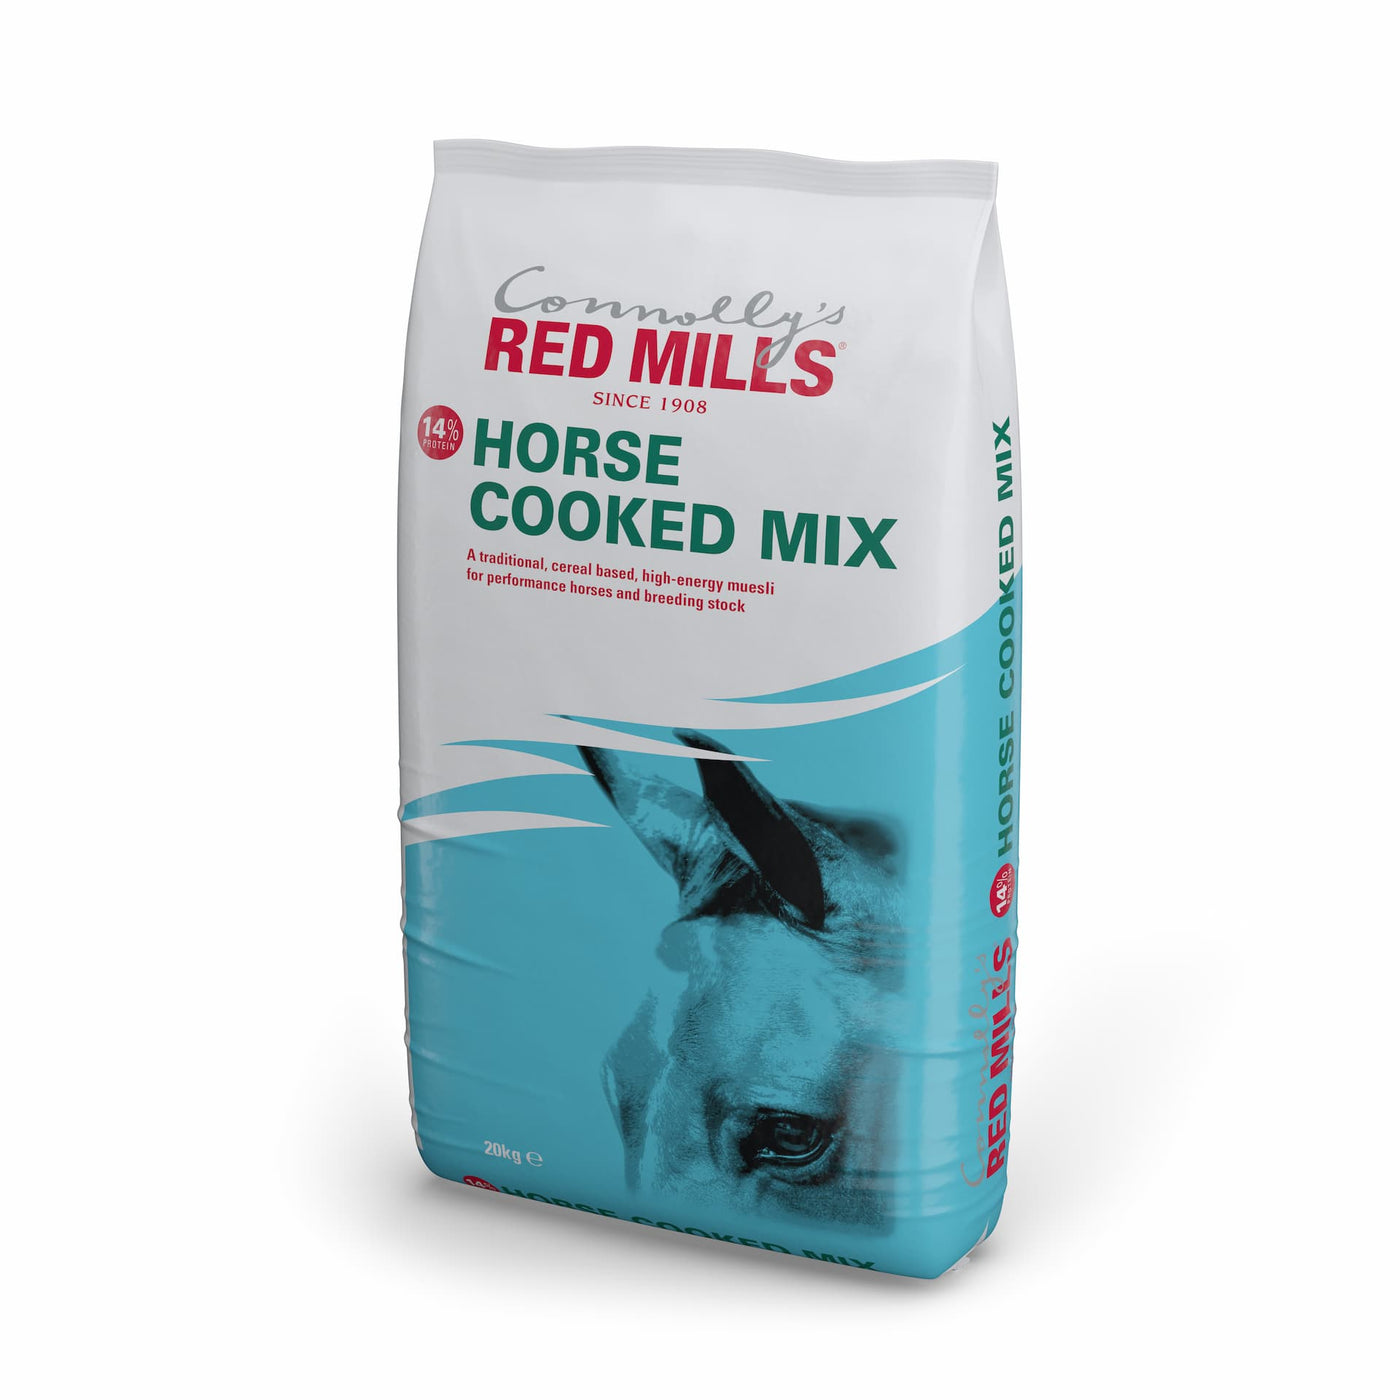 Red Mills Horse Cooked Mix